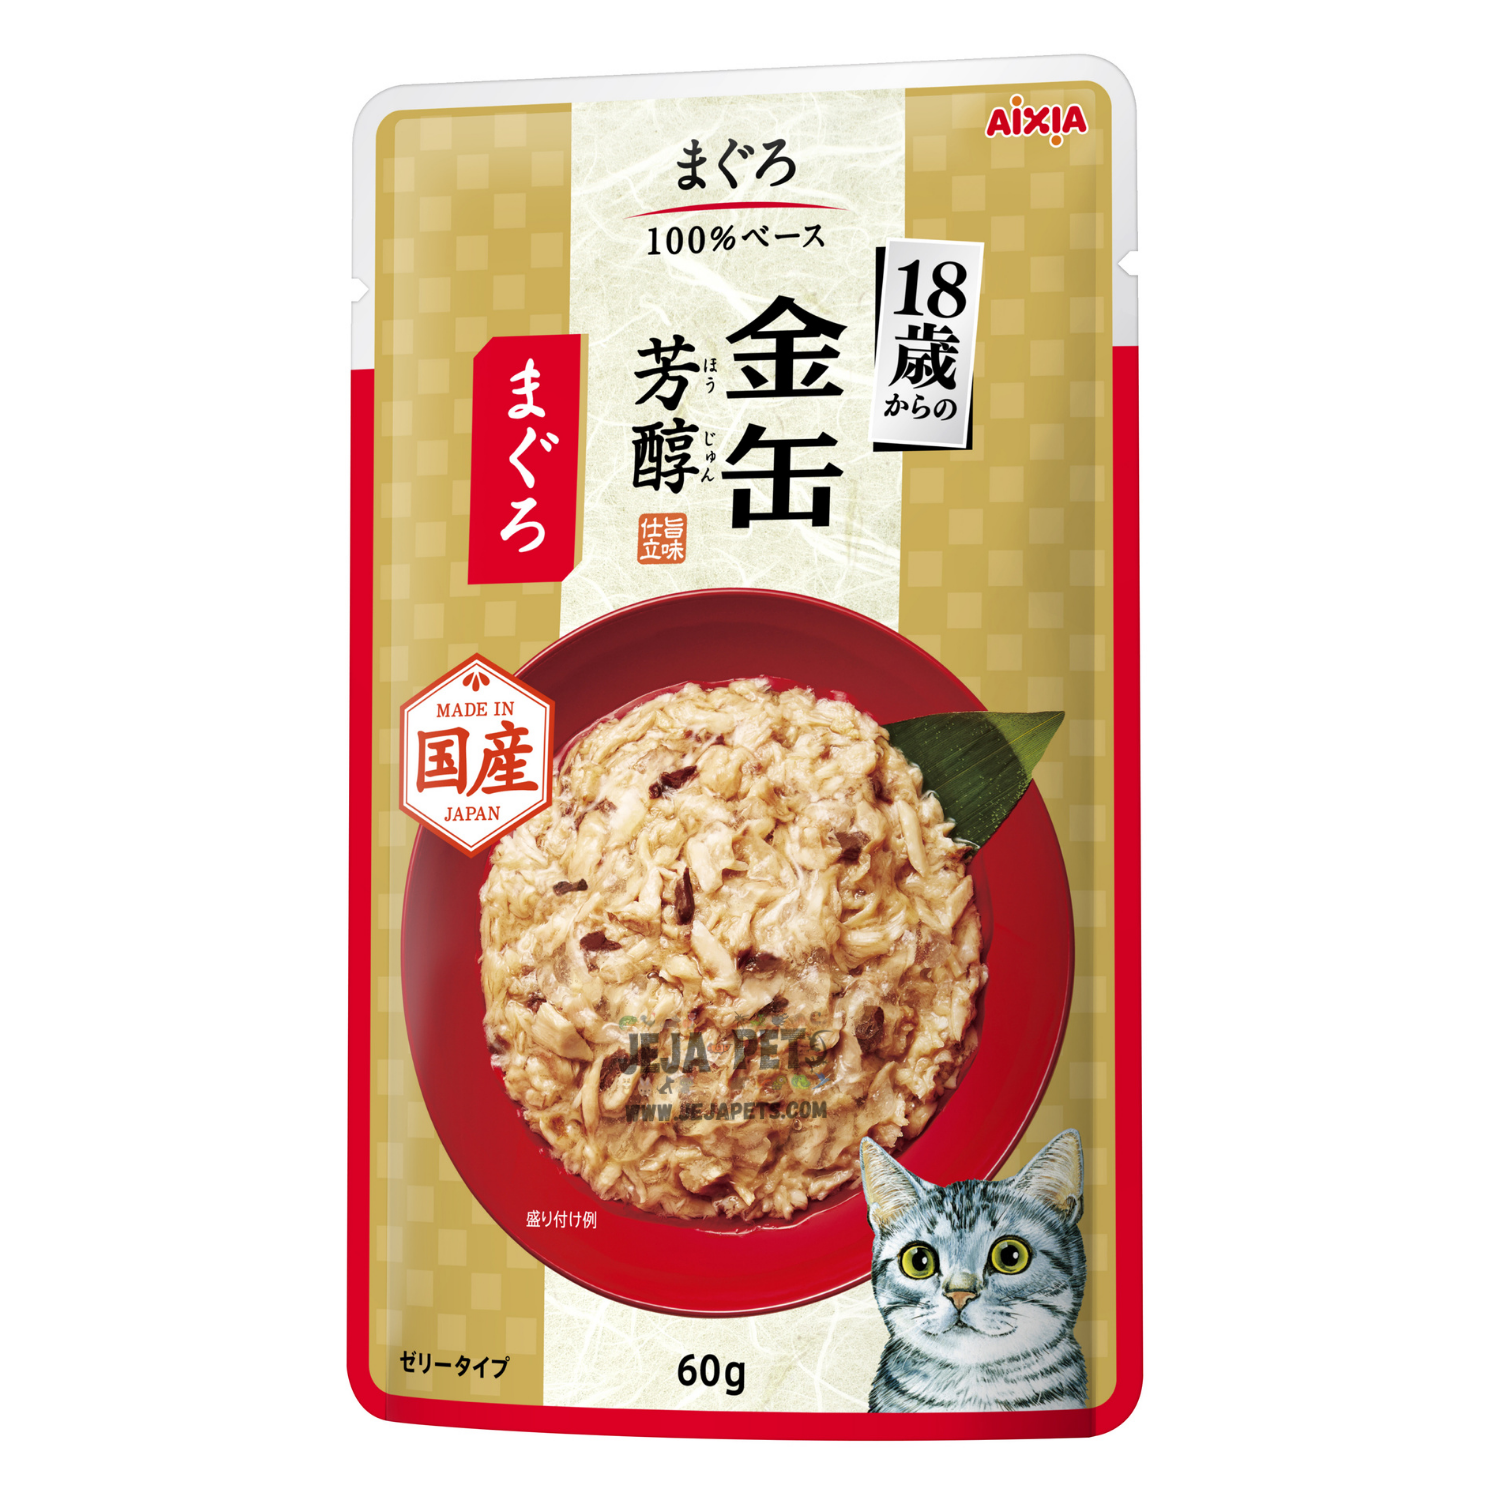 Aixia Kin-Can Rich Tuna >18 years old Pouch Cat Food - 60g